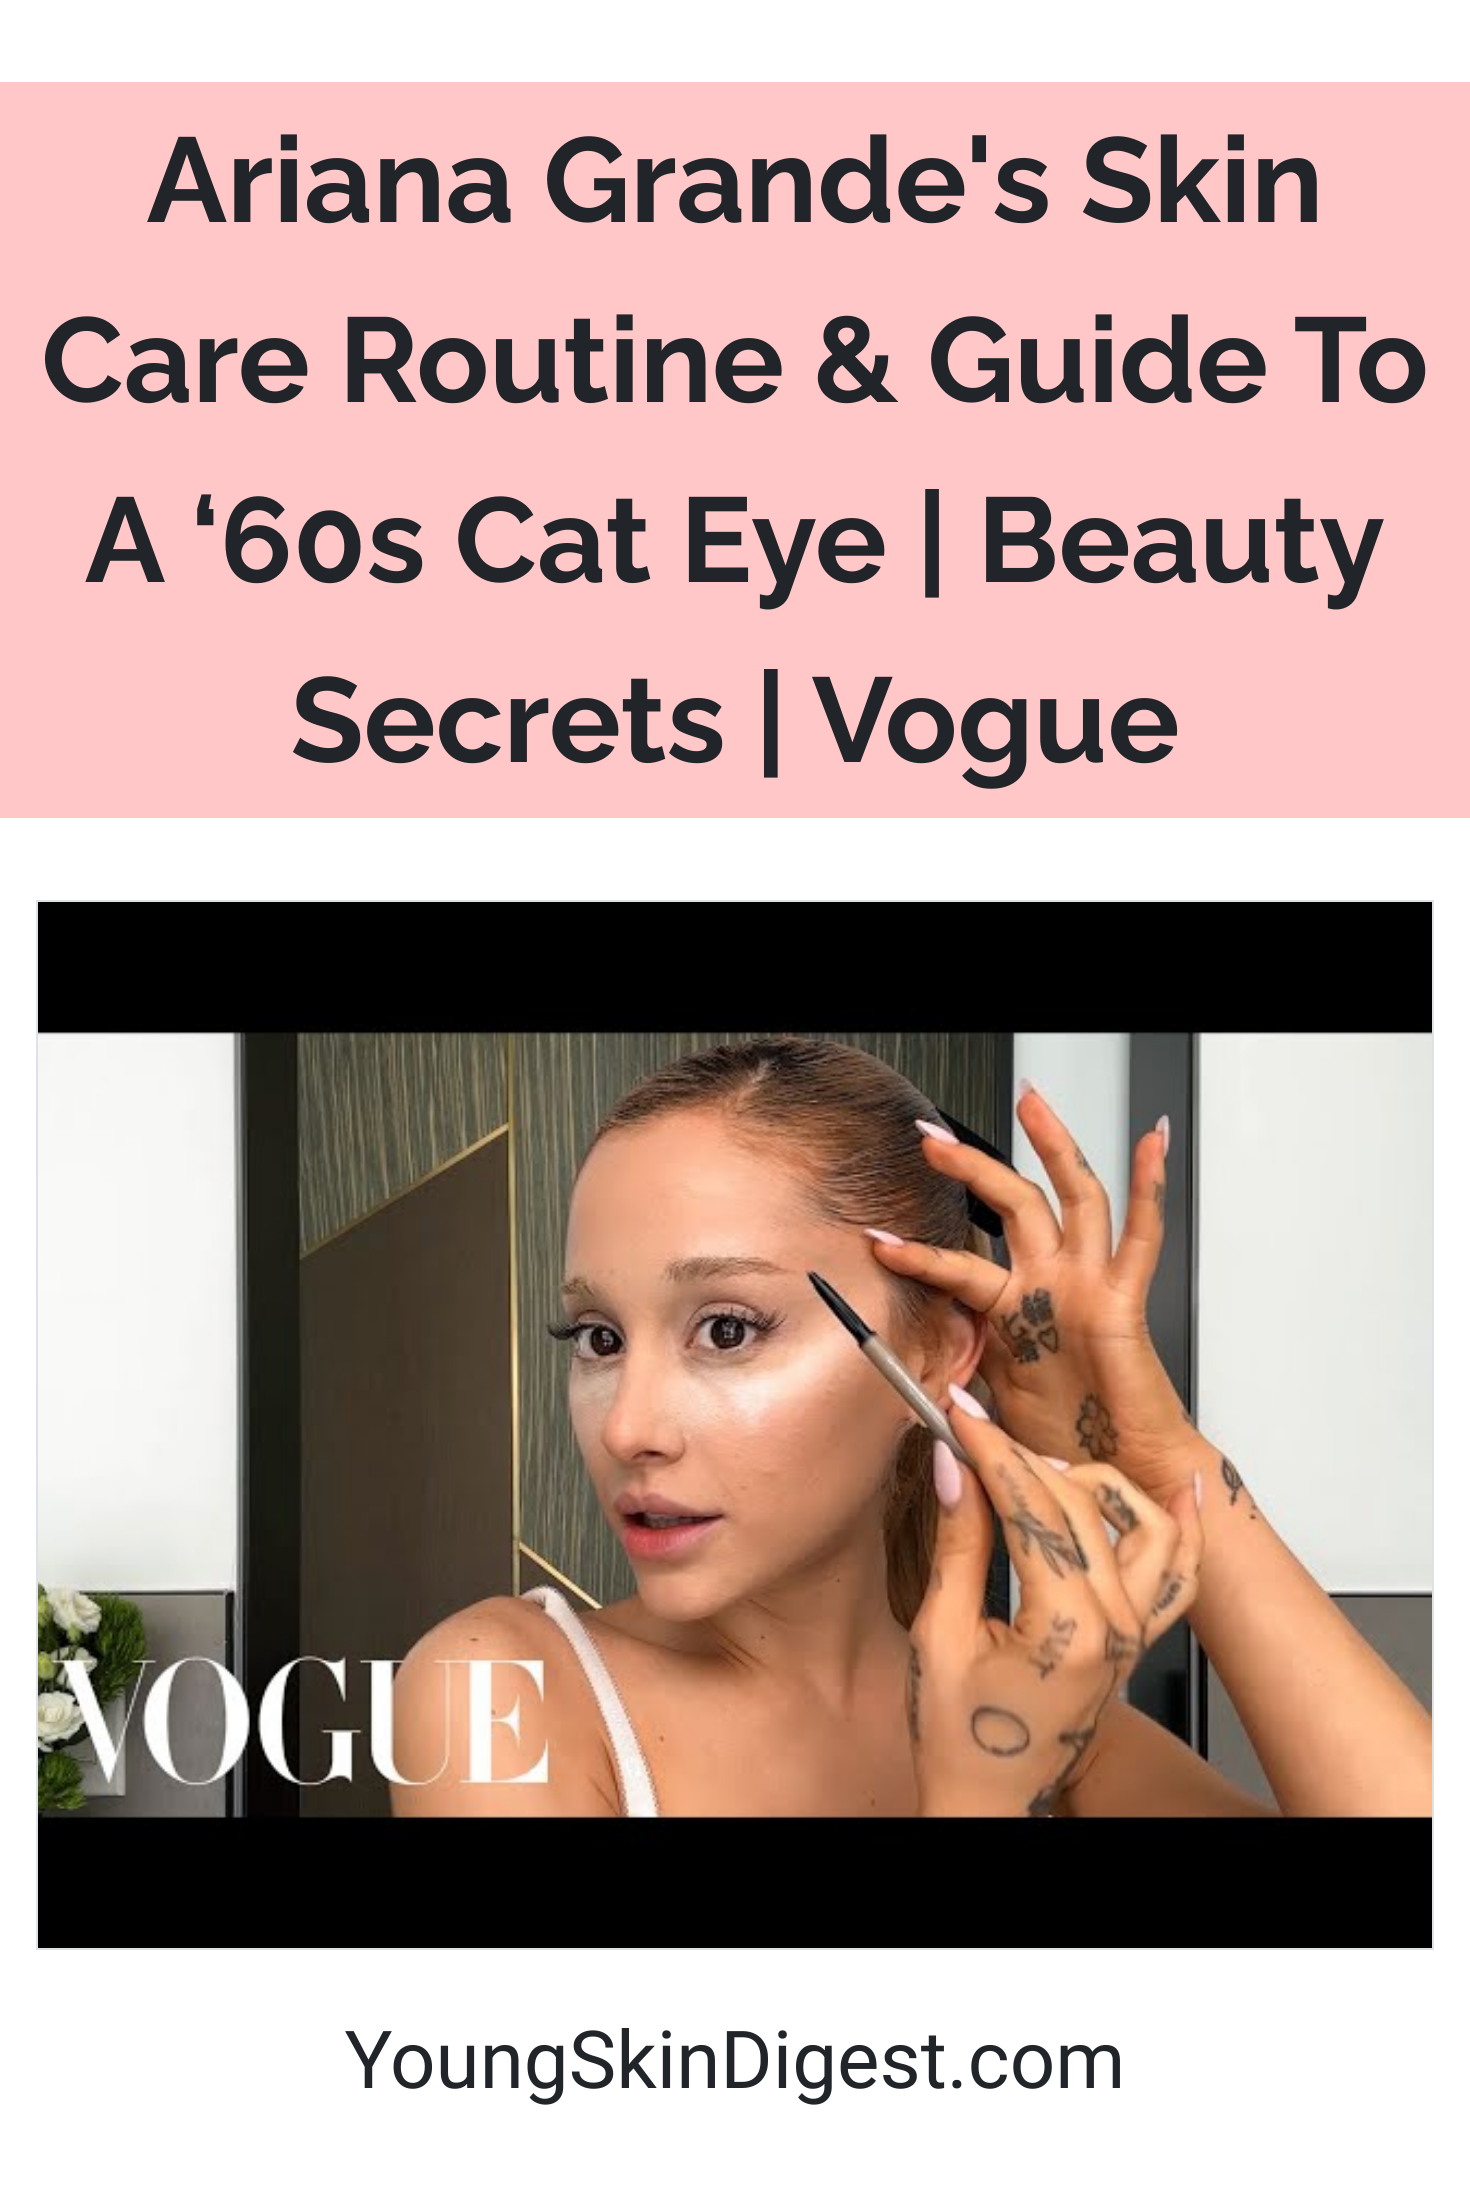 Ariana Grandes Skin Care Routine And Guide To A ‘60s Cat Eye Beauty Secrets Vogue Young